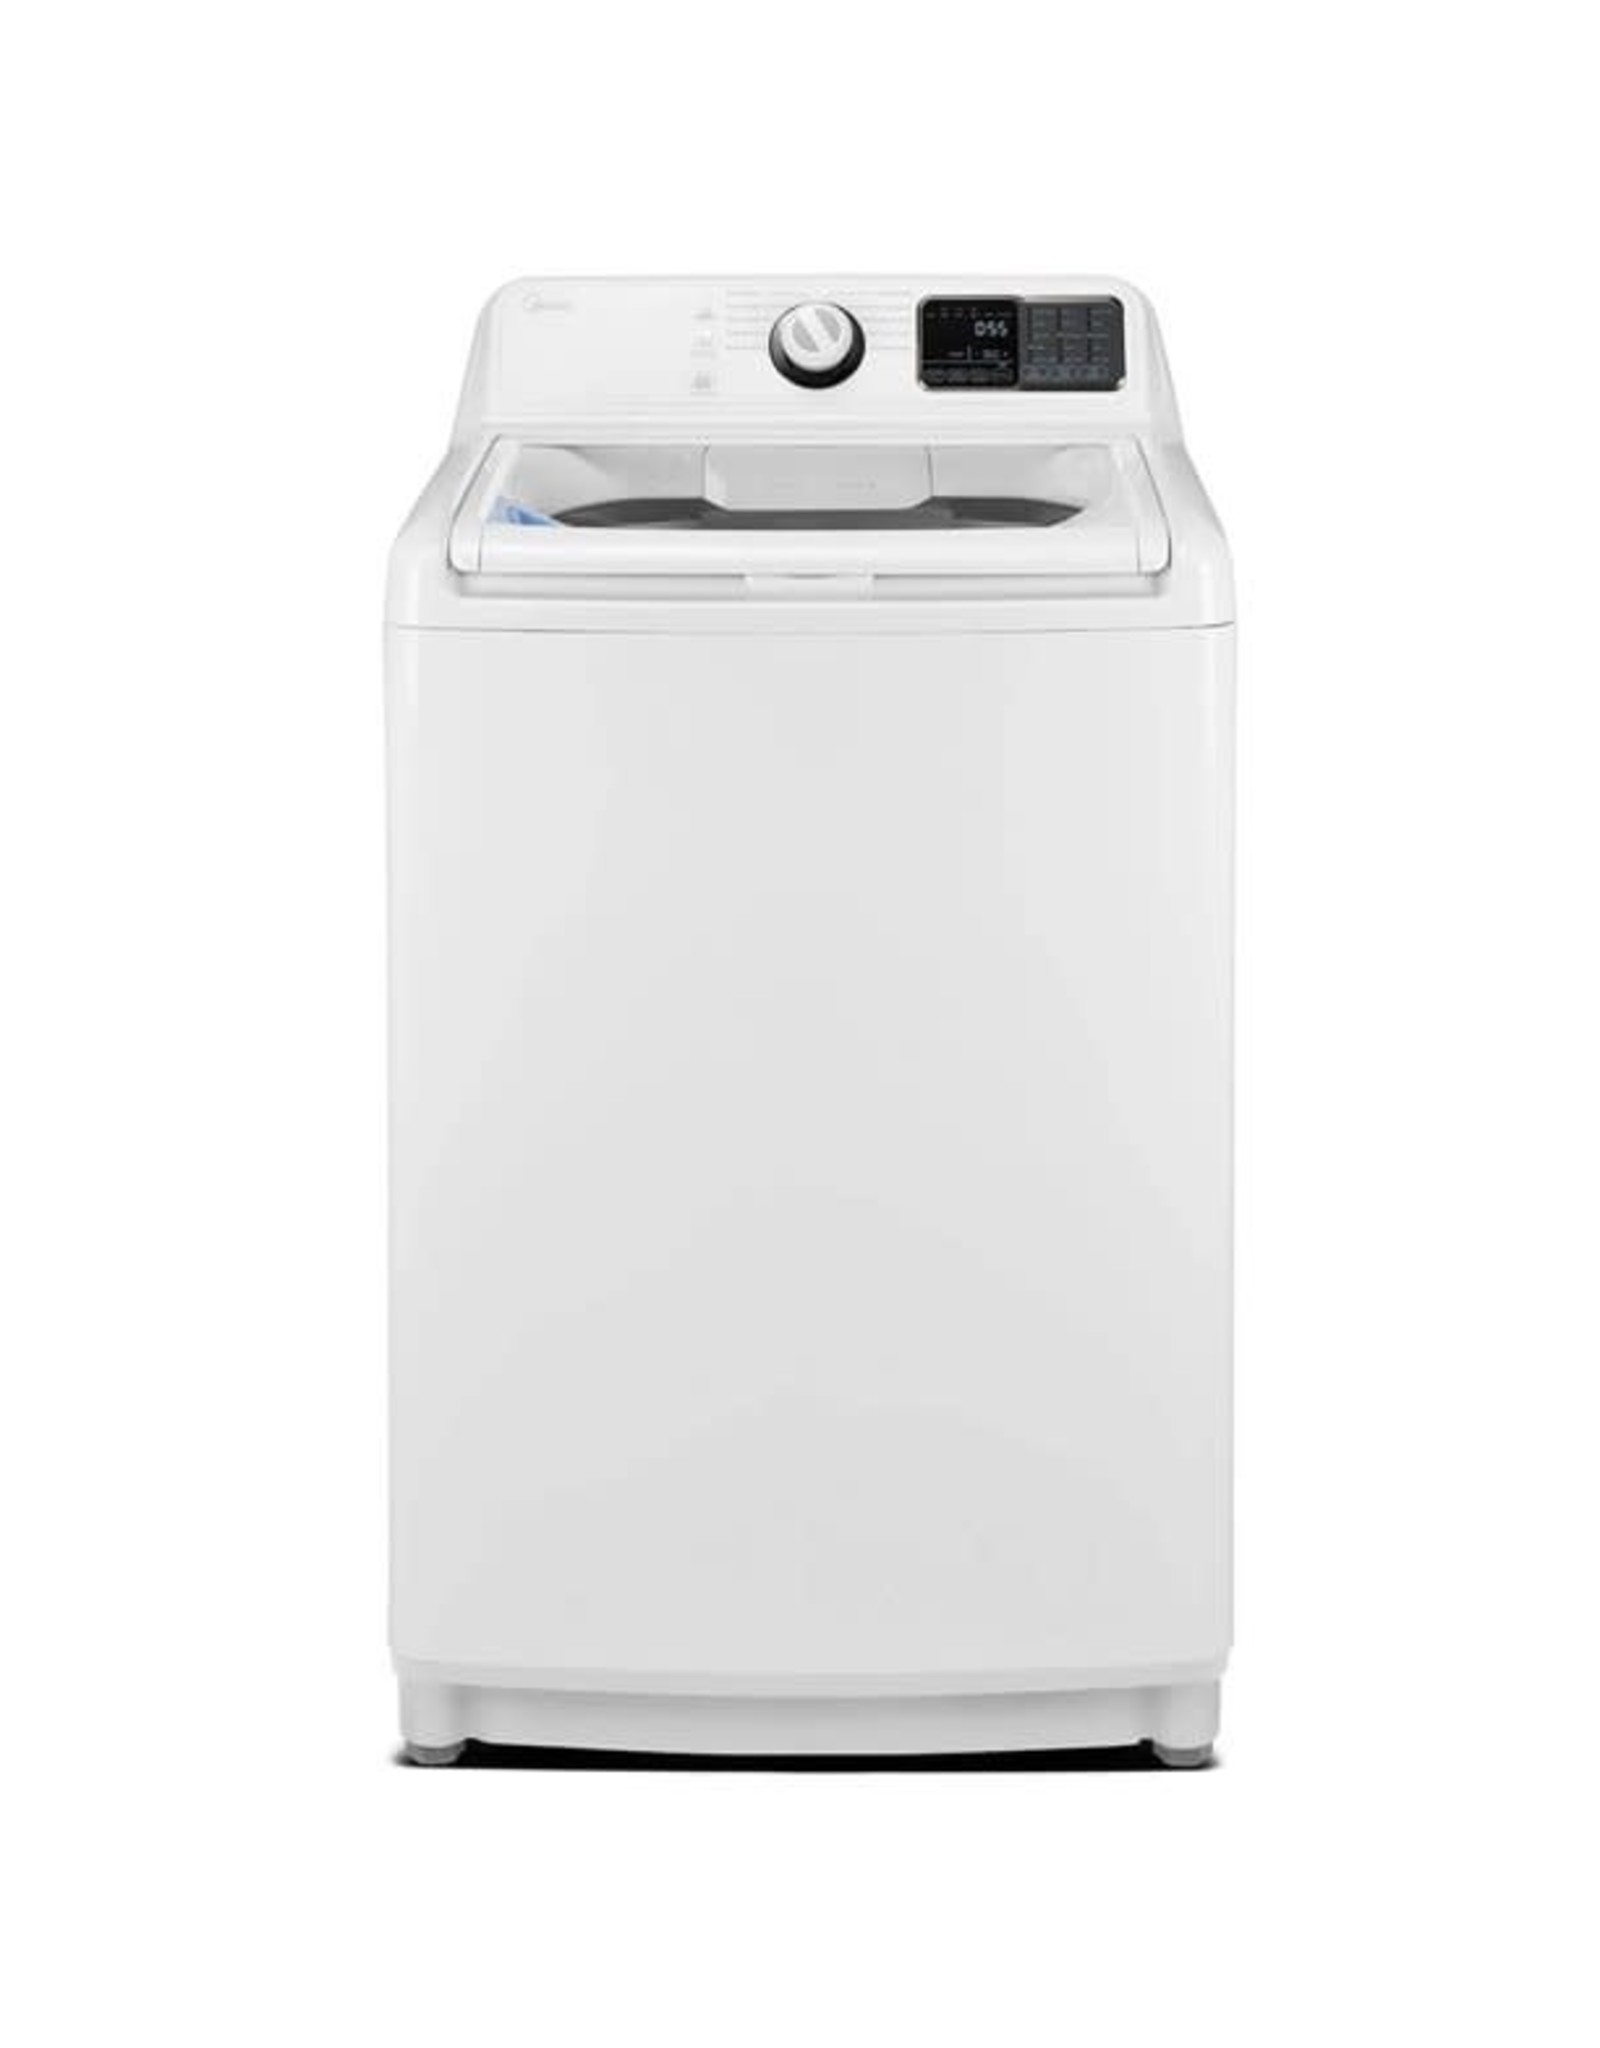 MLV45N1BWW 27 Inch Top Load Washer with 4.5 Cu. Ft. Capacity, Two-Stage Dispenser, Soft Close Glass Lid, Water Plus, 10 Wash Cycles, Quick Wash, Delay Start, Extra Rinse, and Child Lock